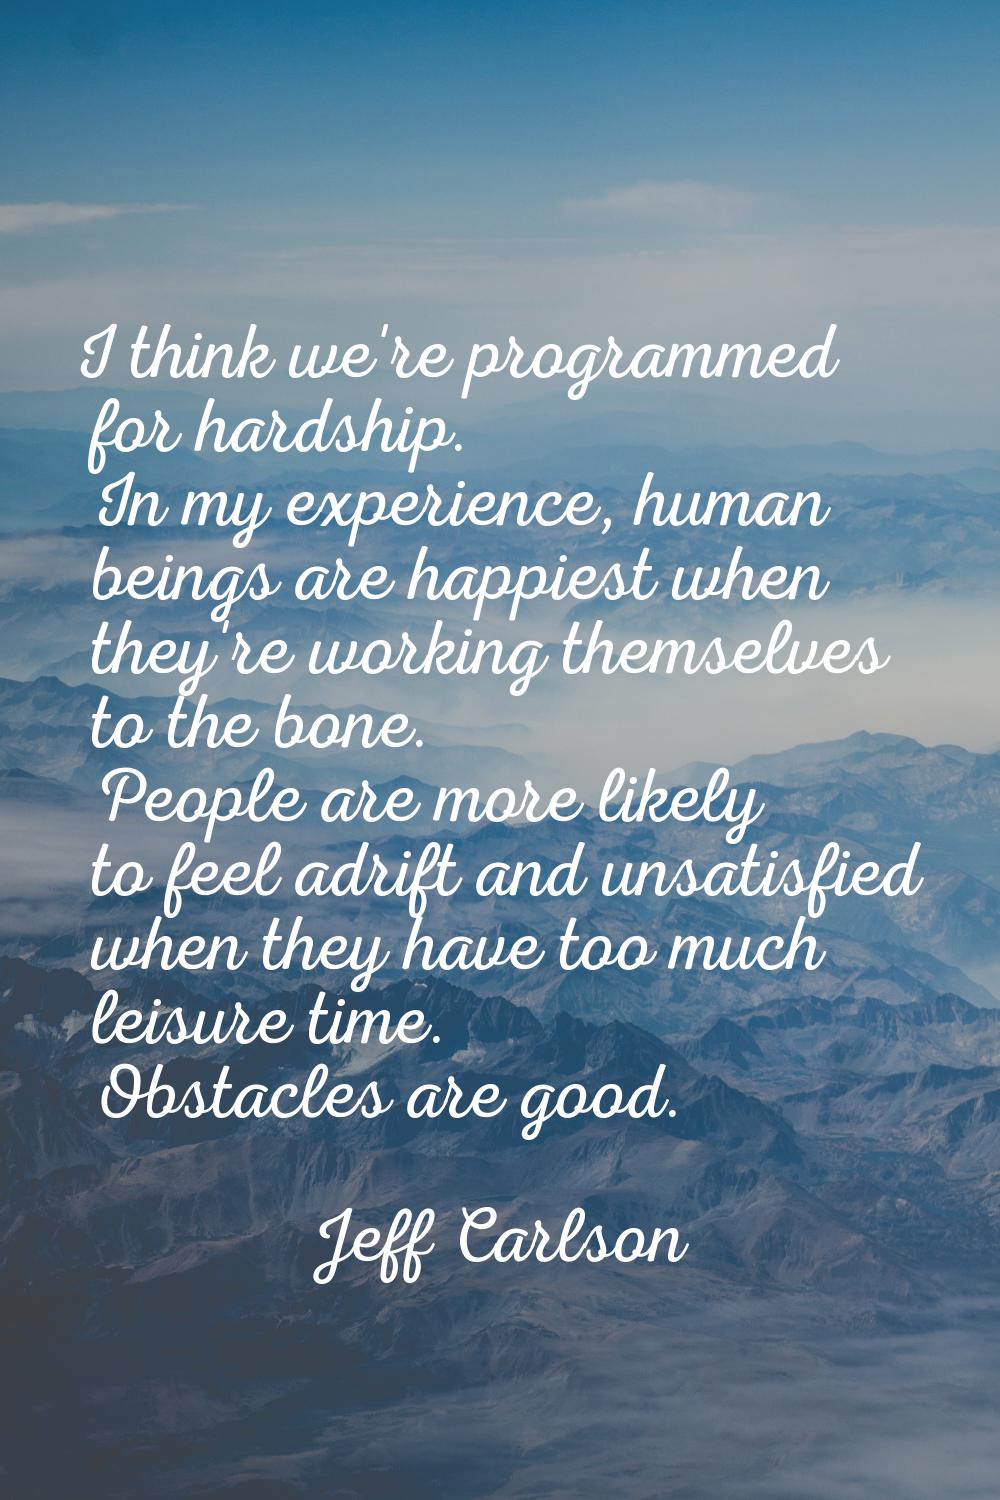 I think we're programmed for hardship. In my experience, human beings are happiest when they're wor